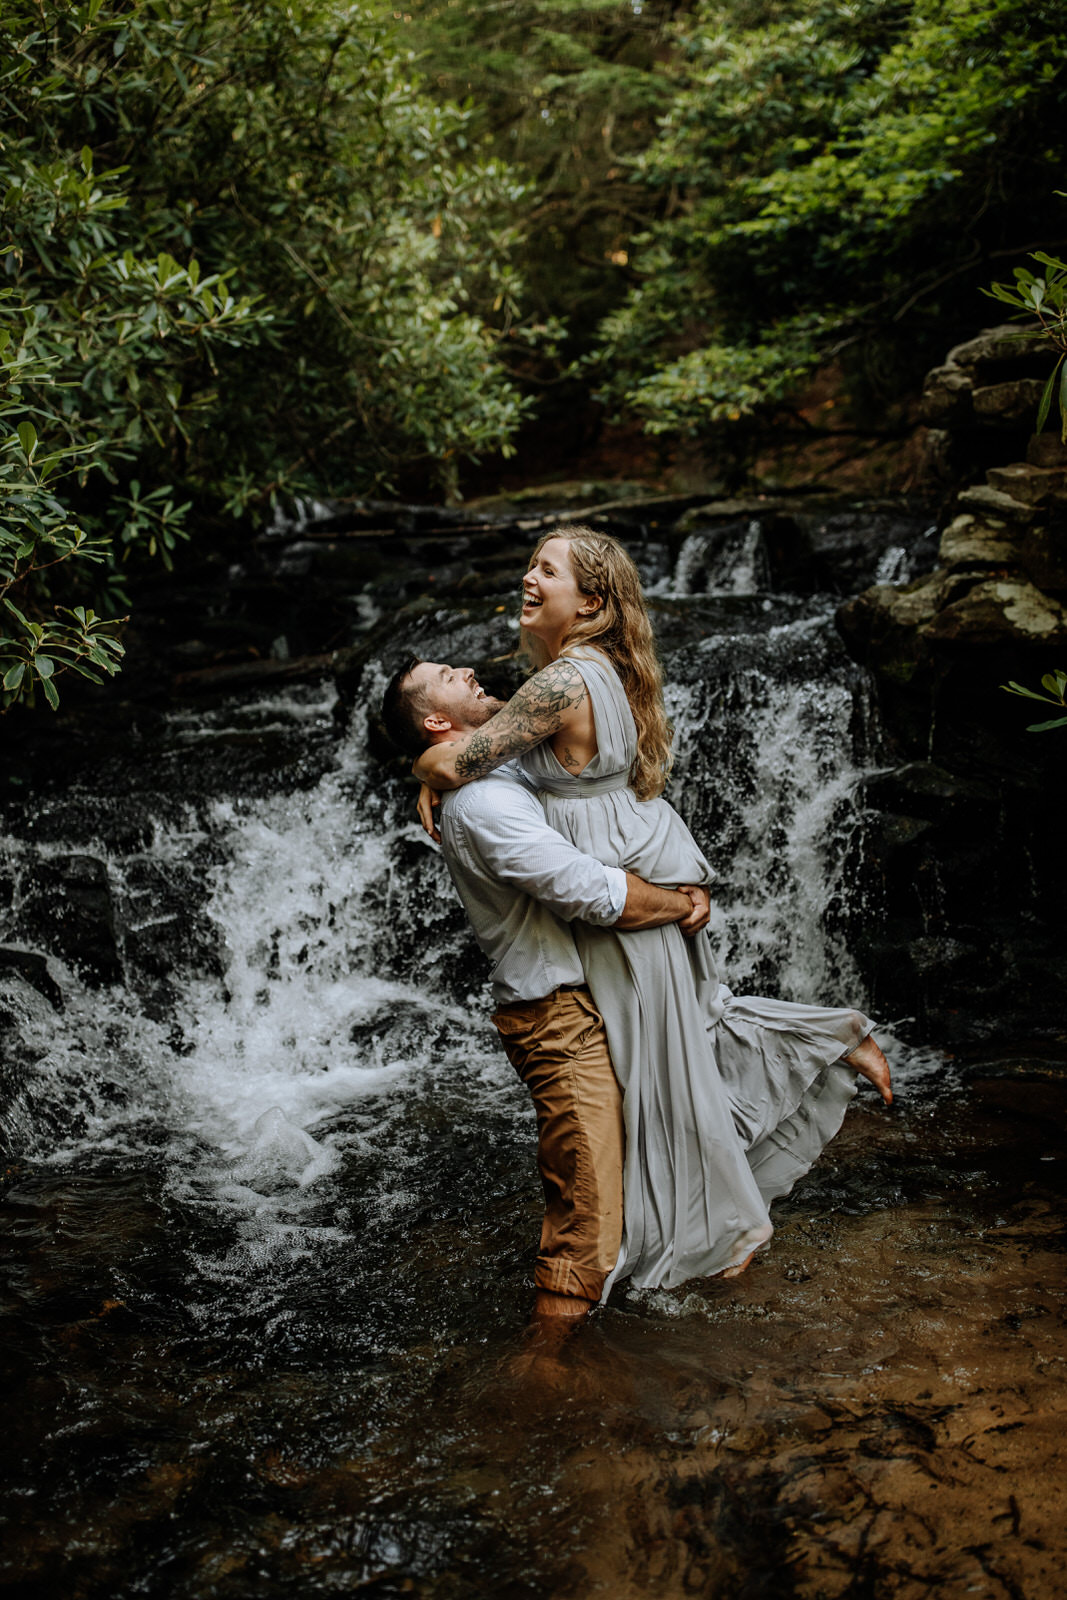 Man picking up a woman and both laughing in front of a waterfall